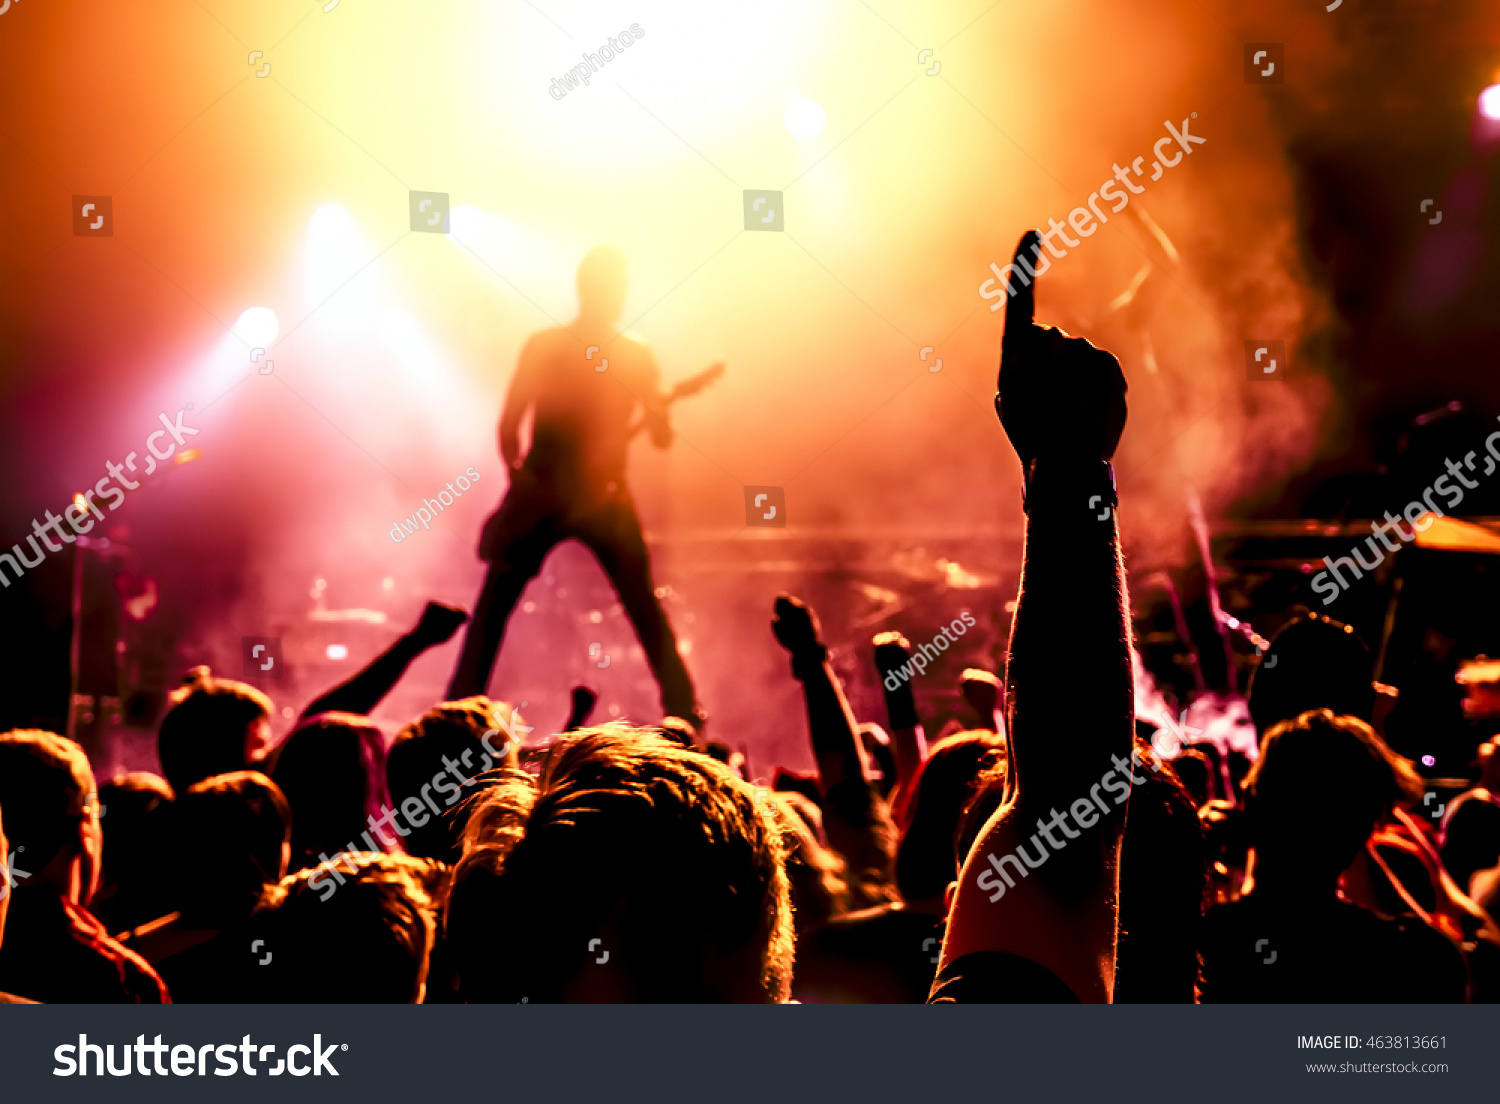 silhouette of guitar player in action on stage in front of concert crowd #463813661